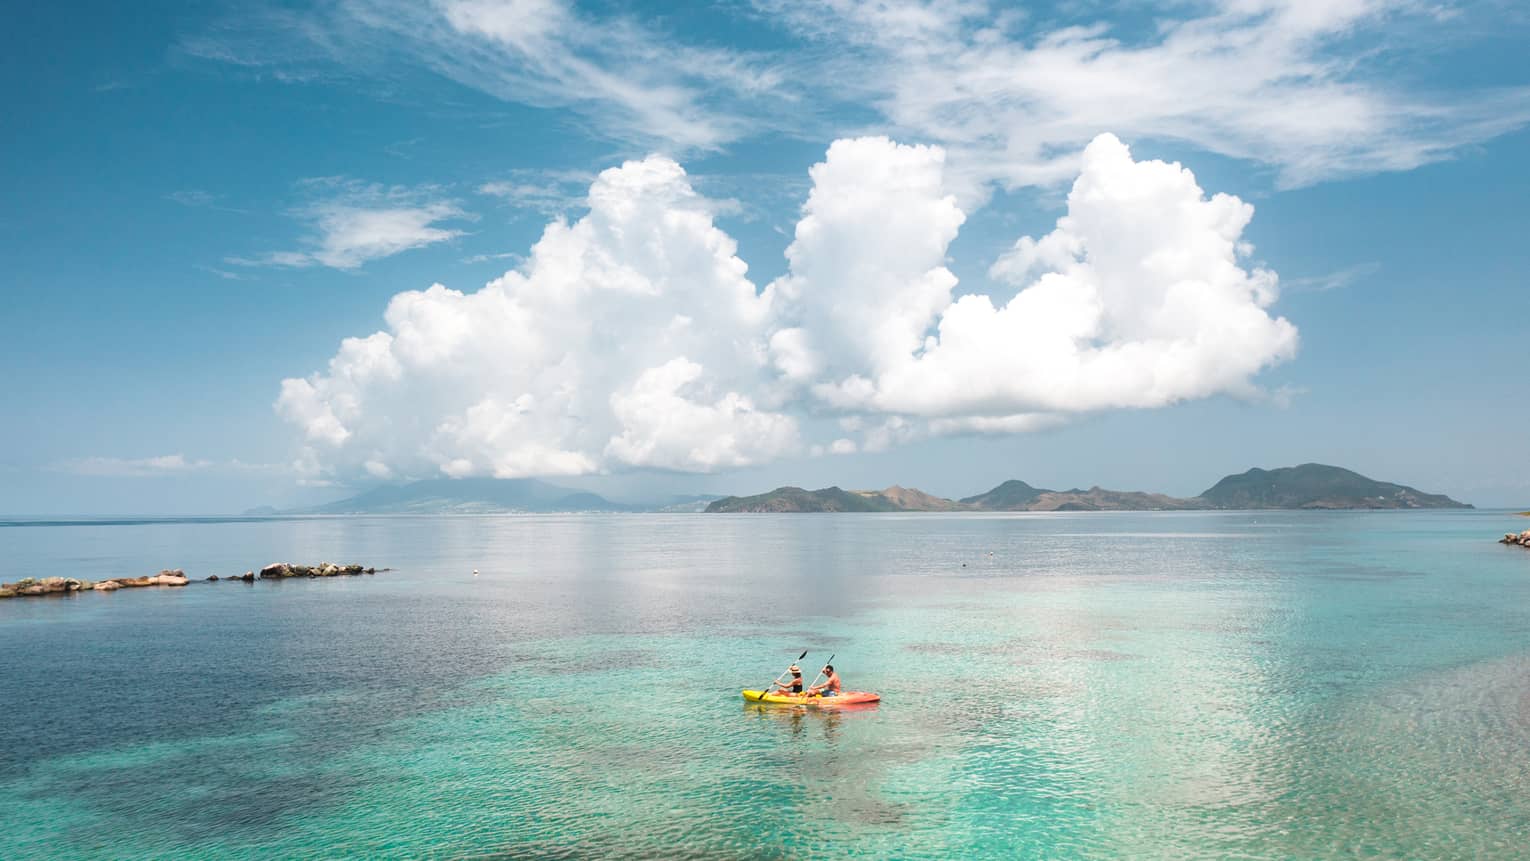 People in a yellow kayak in clear ocean water with large white clouds in the sky above them.